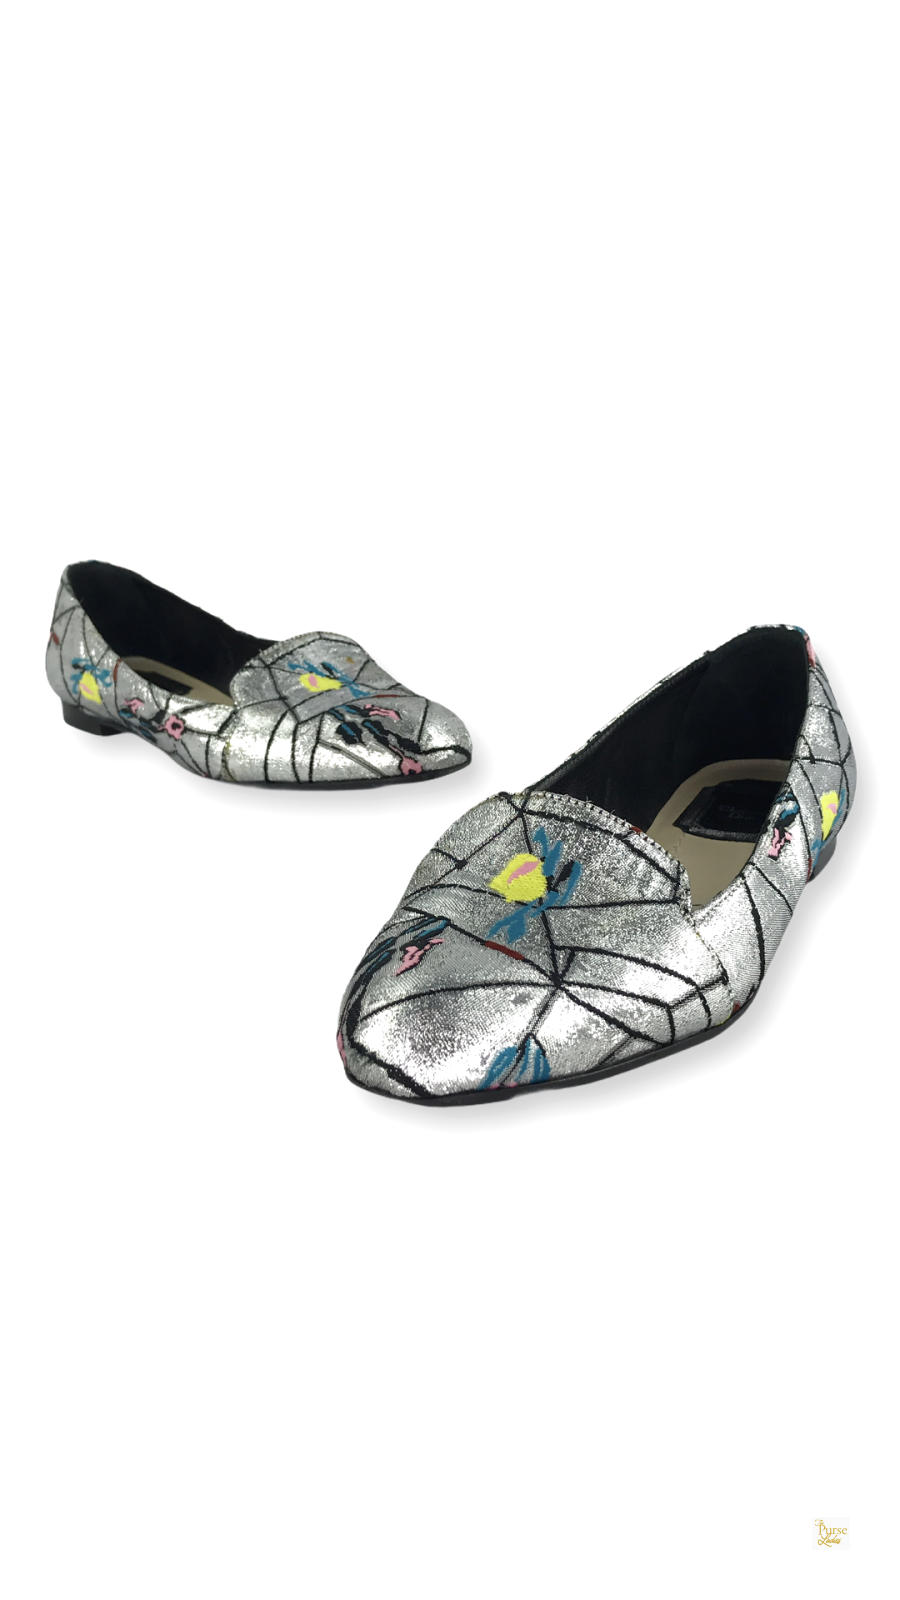 CHRISTIAN DIOR Silver Metallic Floral Brocade Loafers